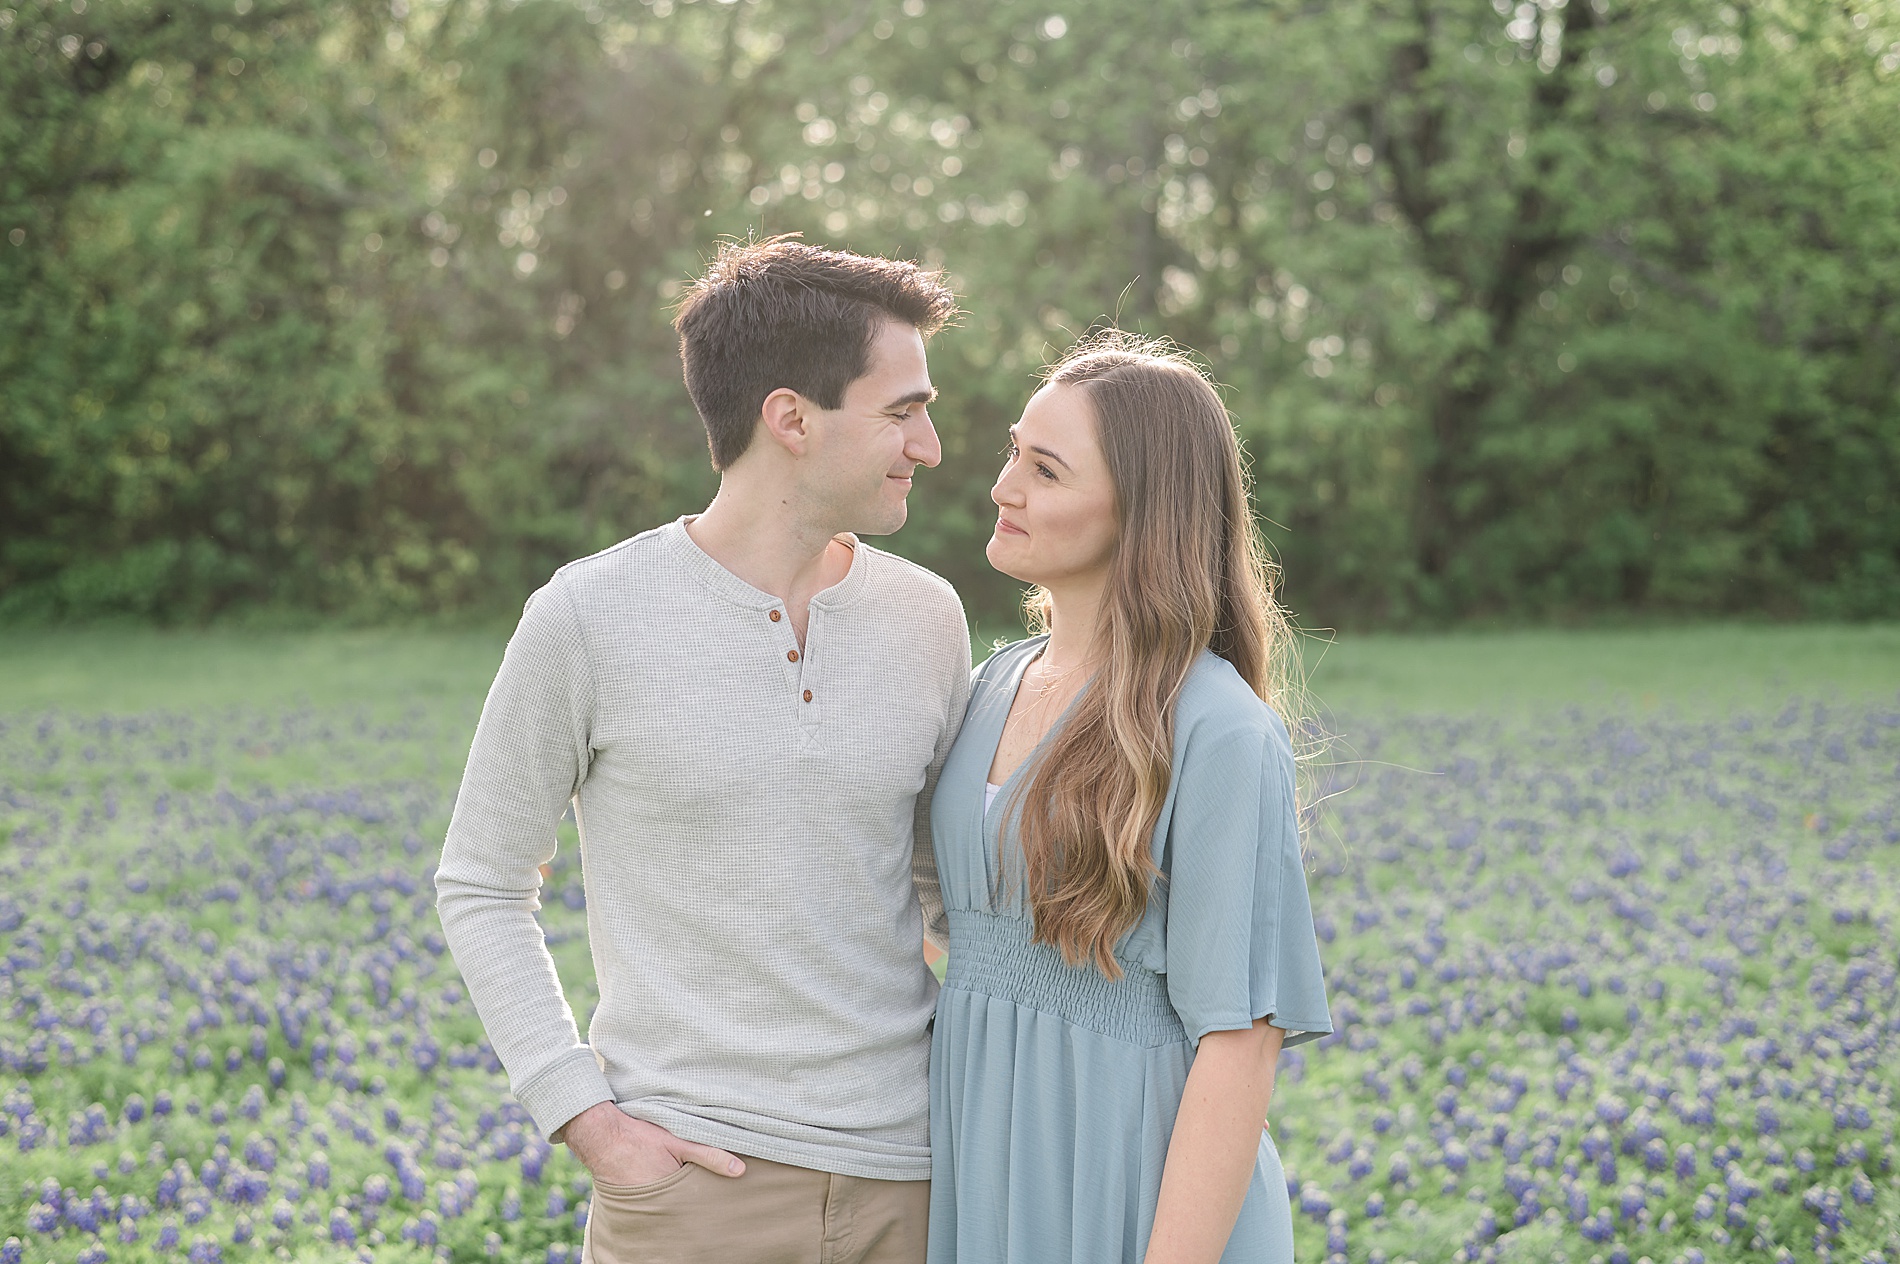 couples portraits from Bluebonnet session in Dallas, TX photographed by Lindsey Dutton Photography, a Dallas family photographer